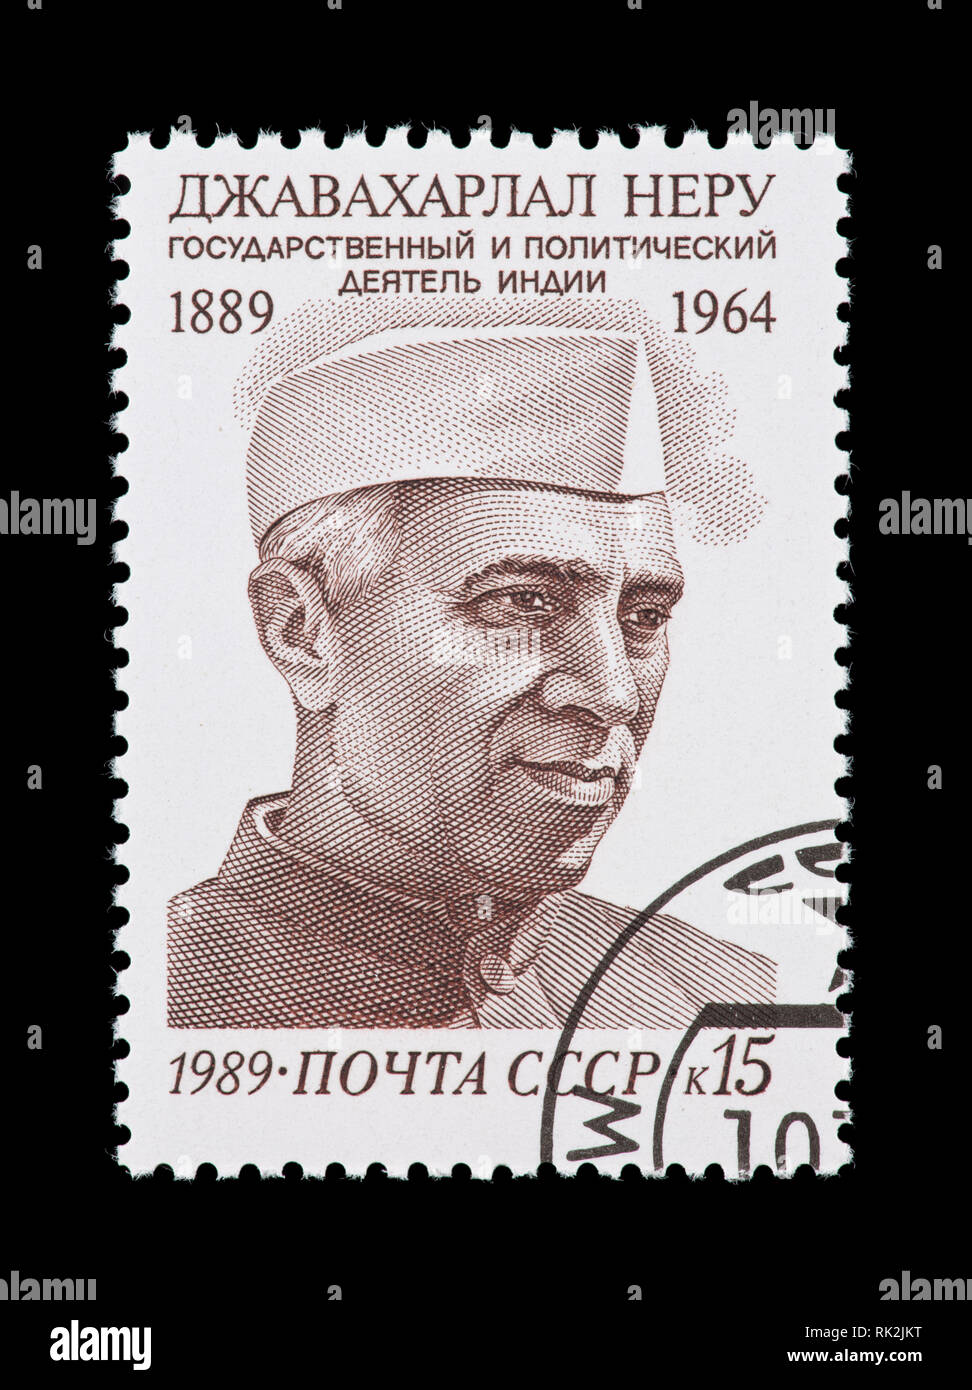 Postage stamp from the Soviet Union depicting Jawaharlal Nehru, first prime minister of independent India. Stock Photo